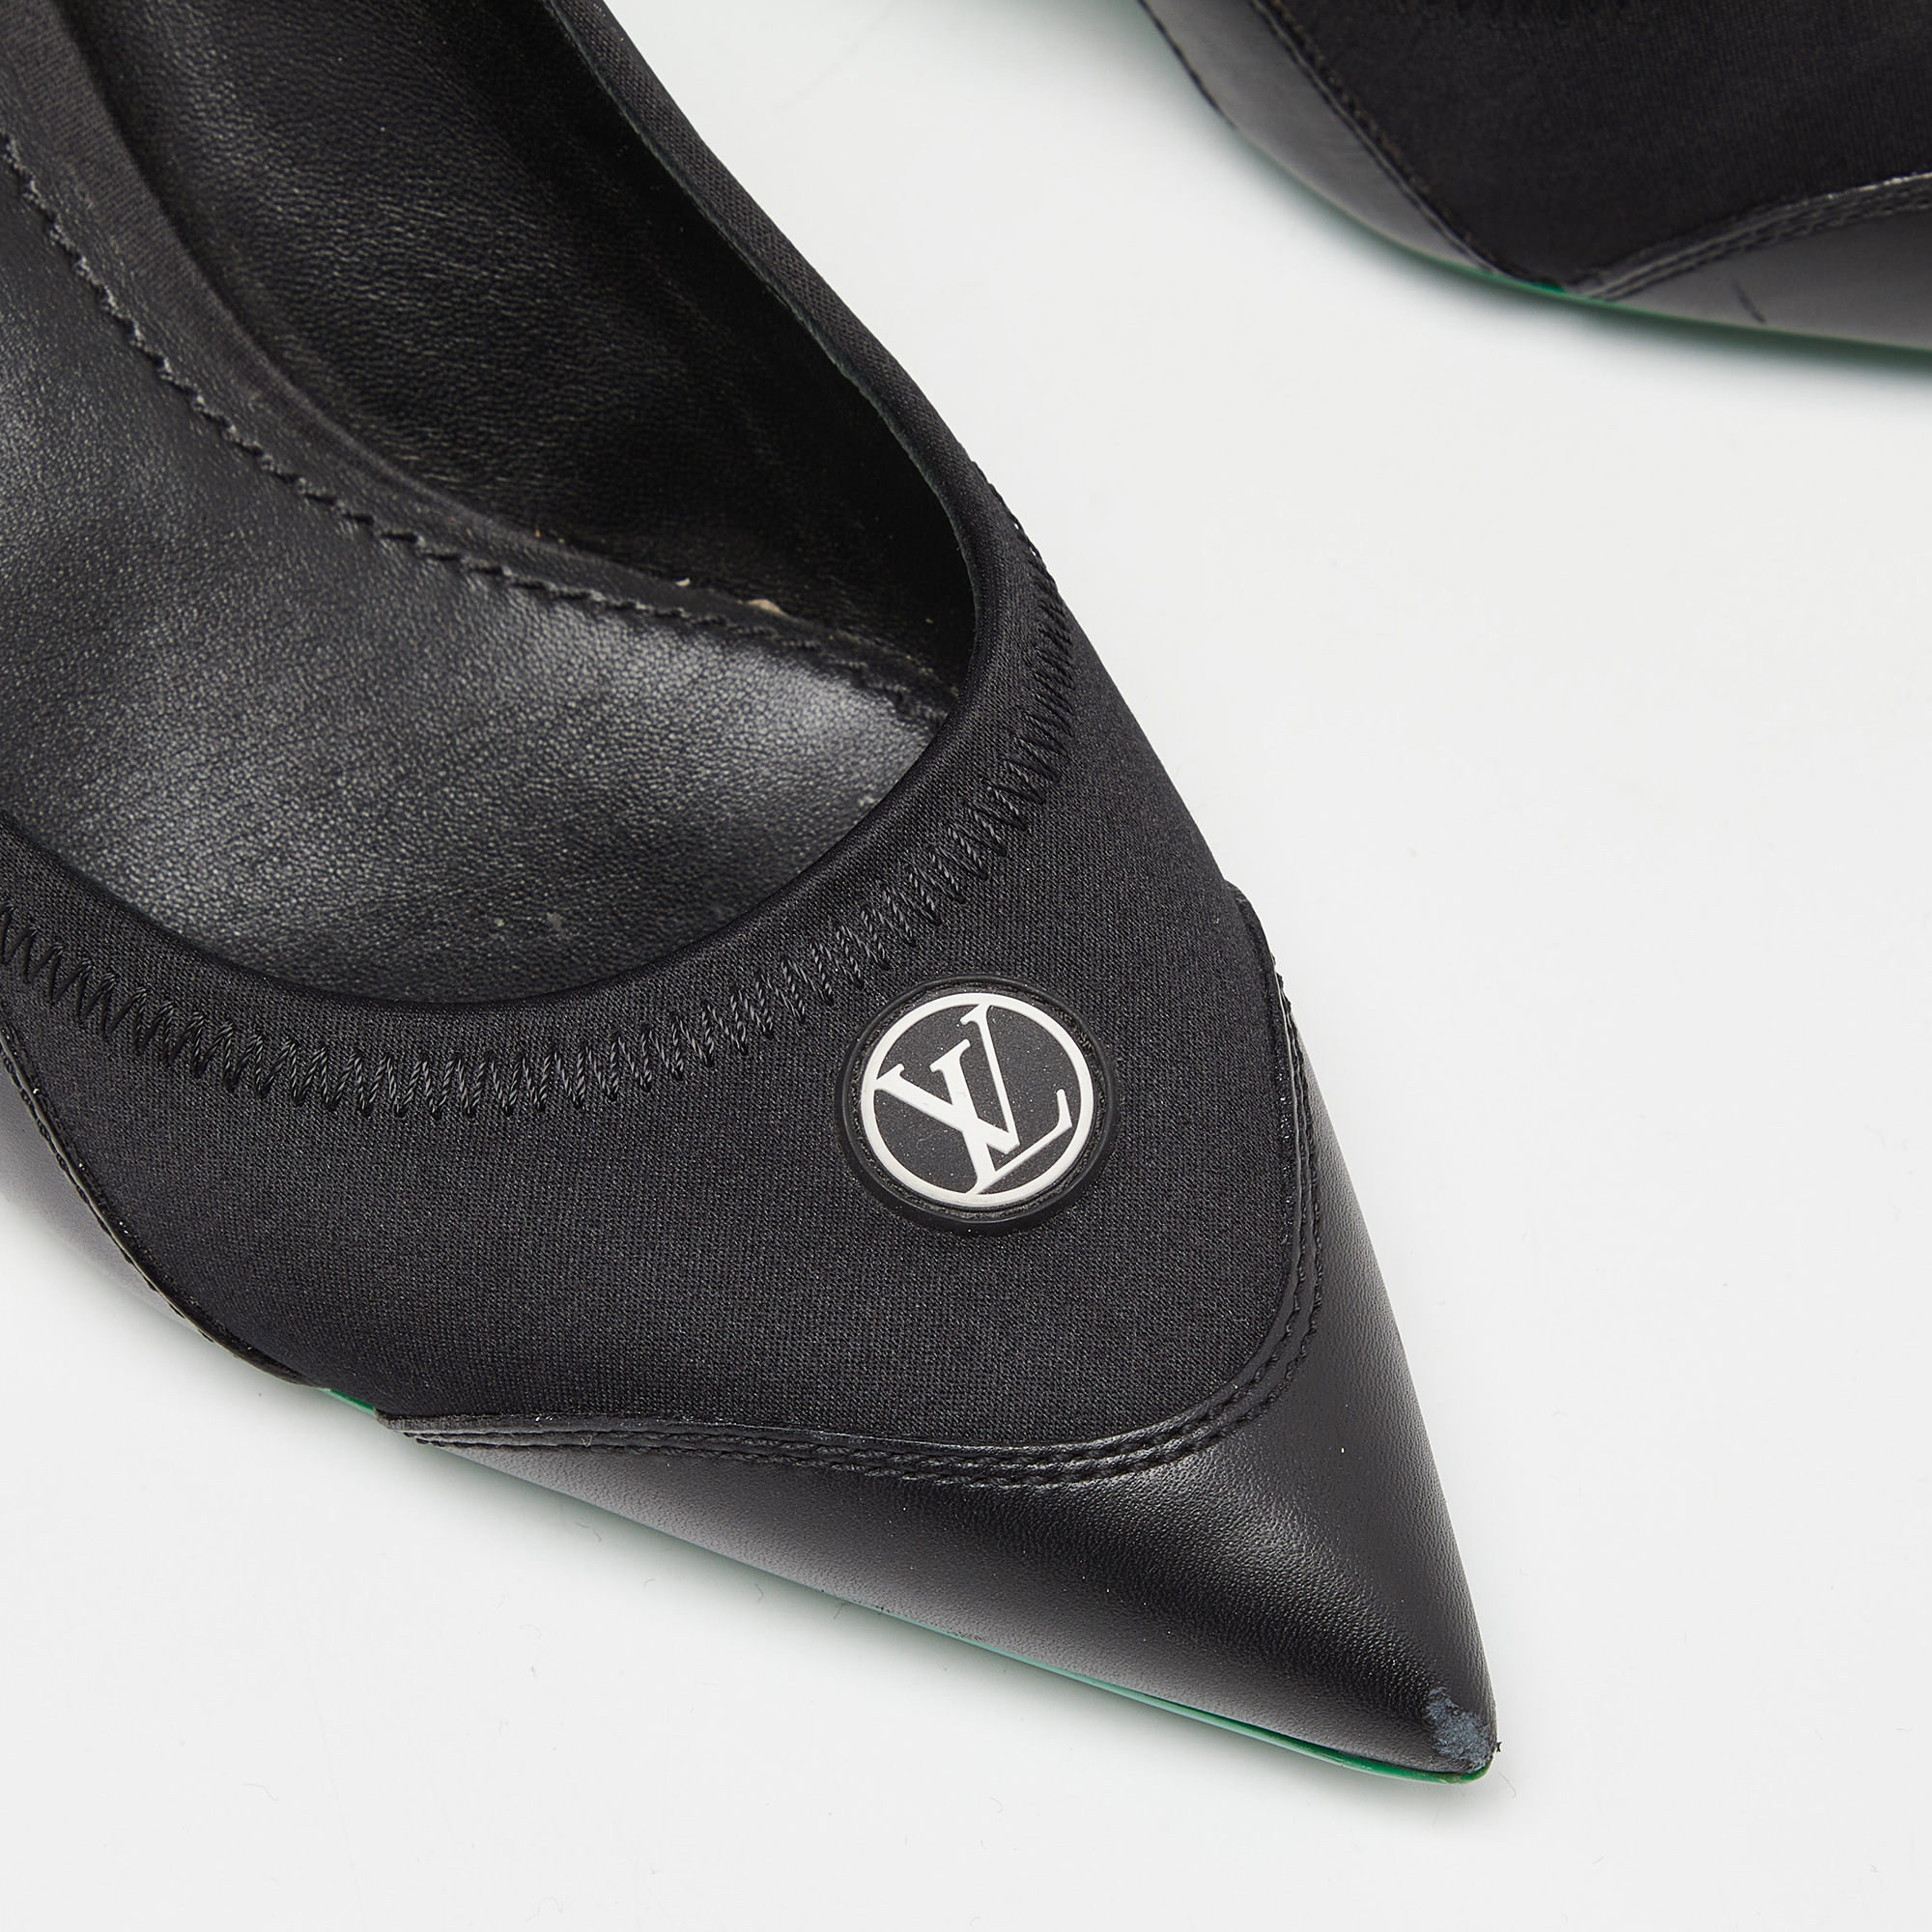 Louis Vuitton Black/Green Satin, Mesh And Leather Archlight Slingback Pumps Size 38